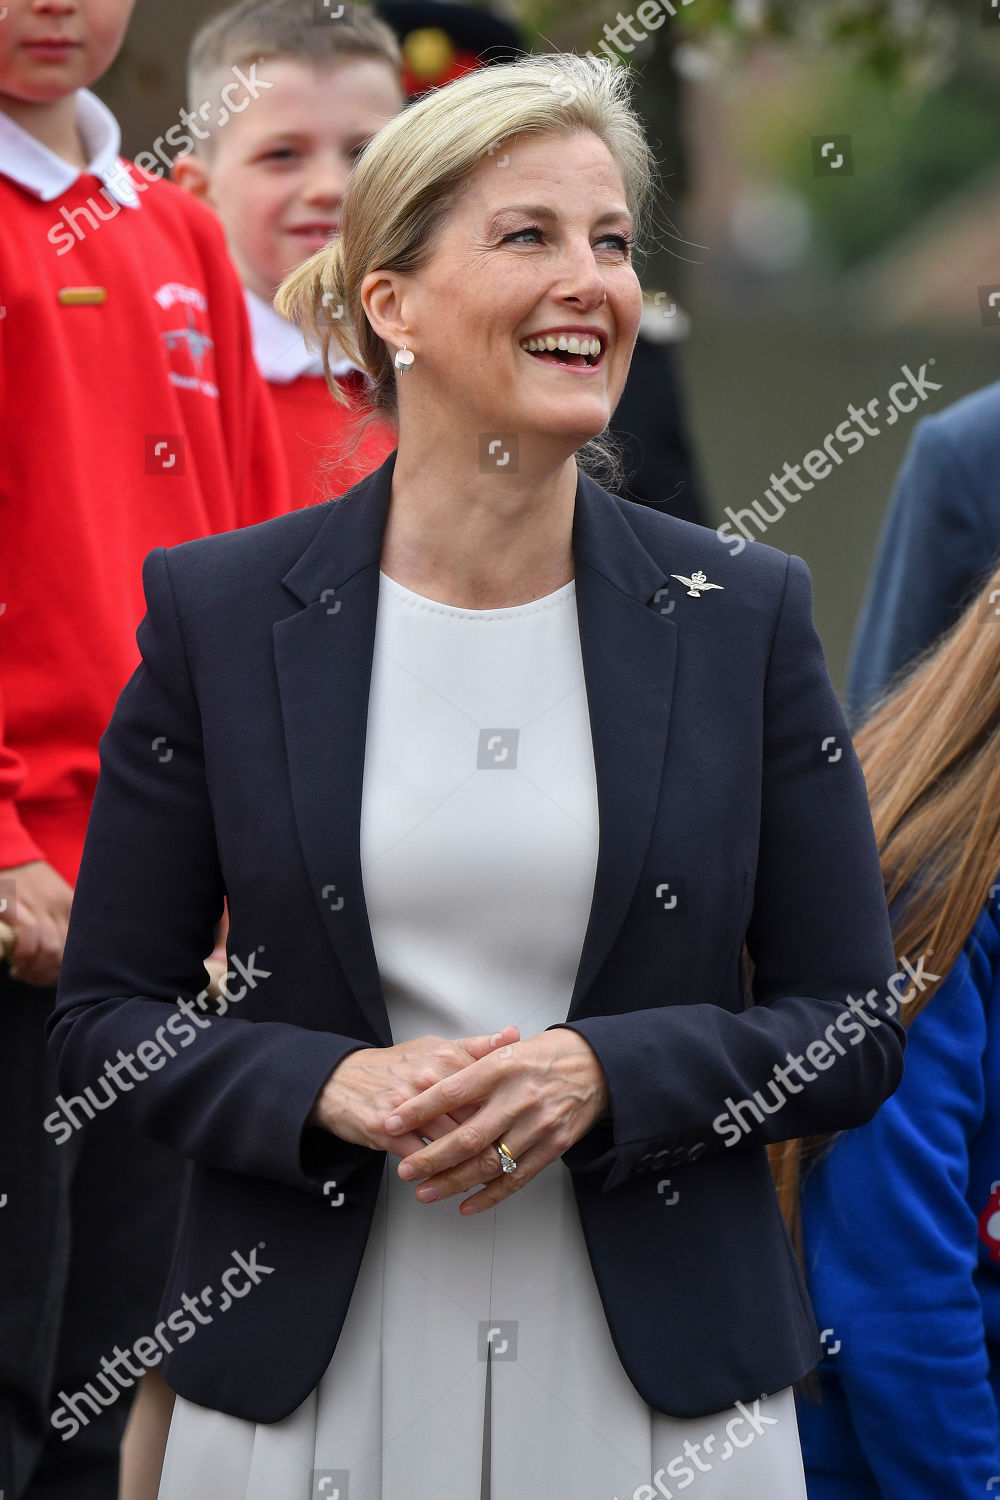 sophie-countess-of-wessex-opens-airplay-play-park-wittering-village-peterborough-uk-shutterstock-editorial-10217568al.jpg